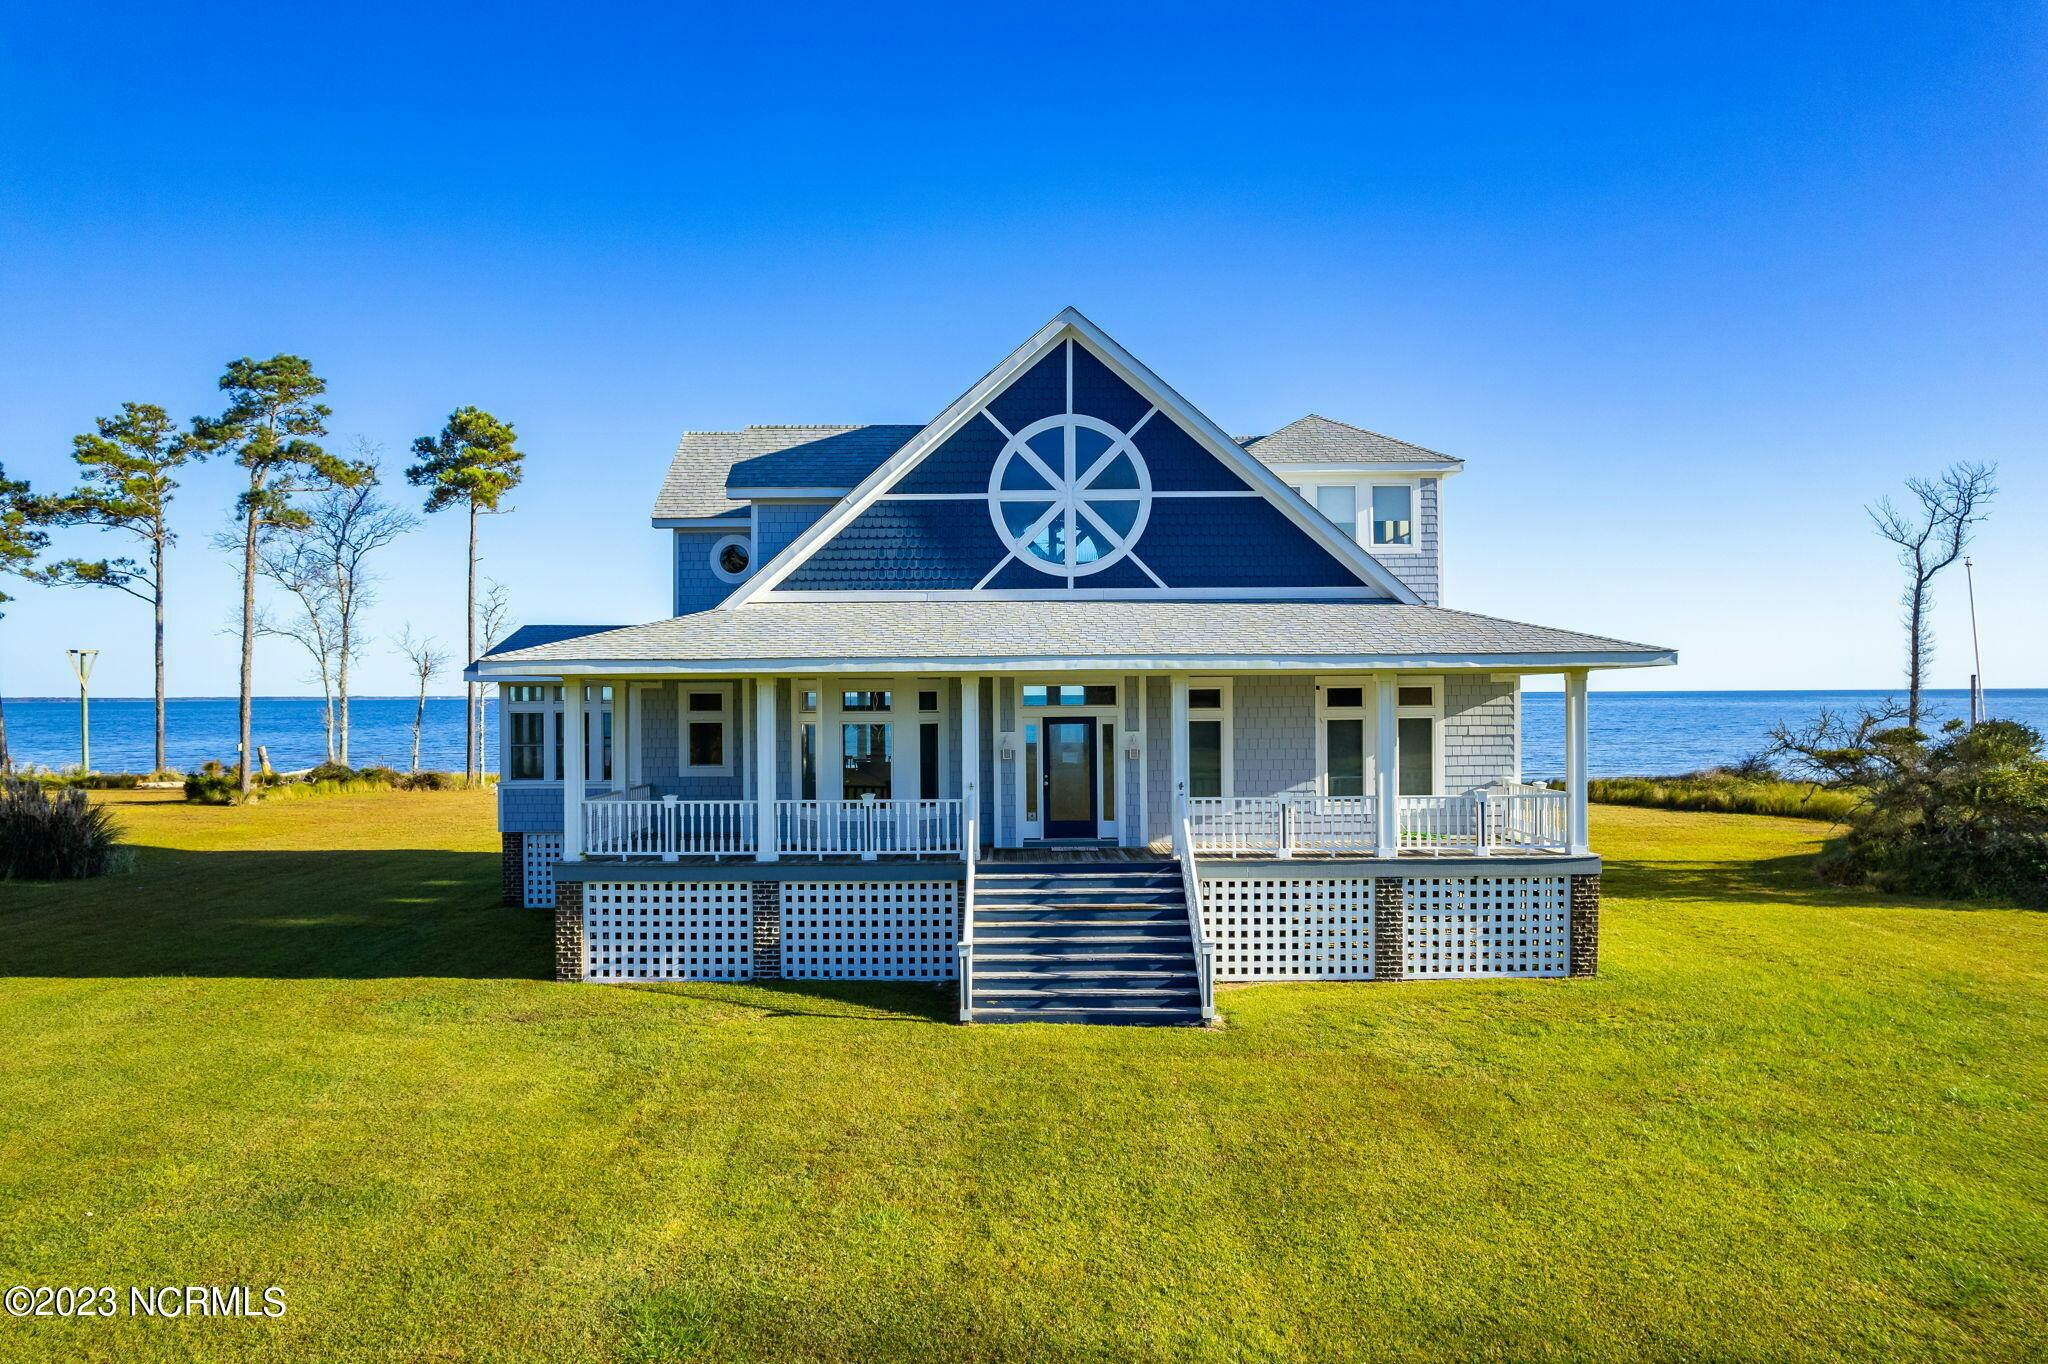 South River waterfront home in Beaufort